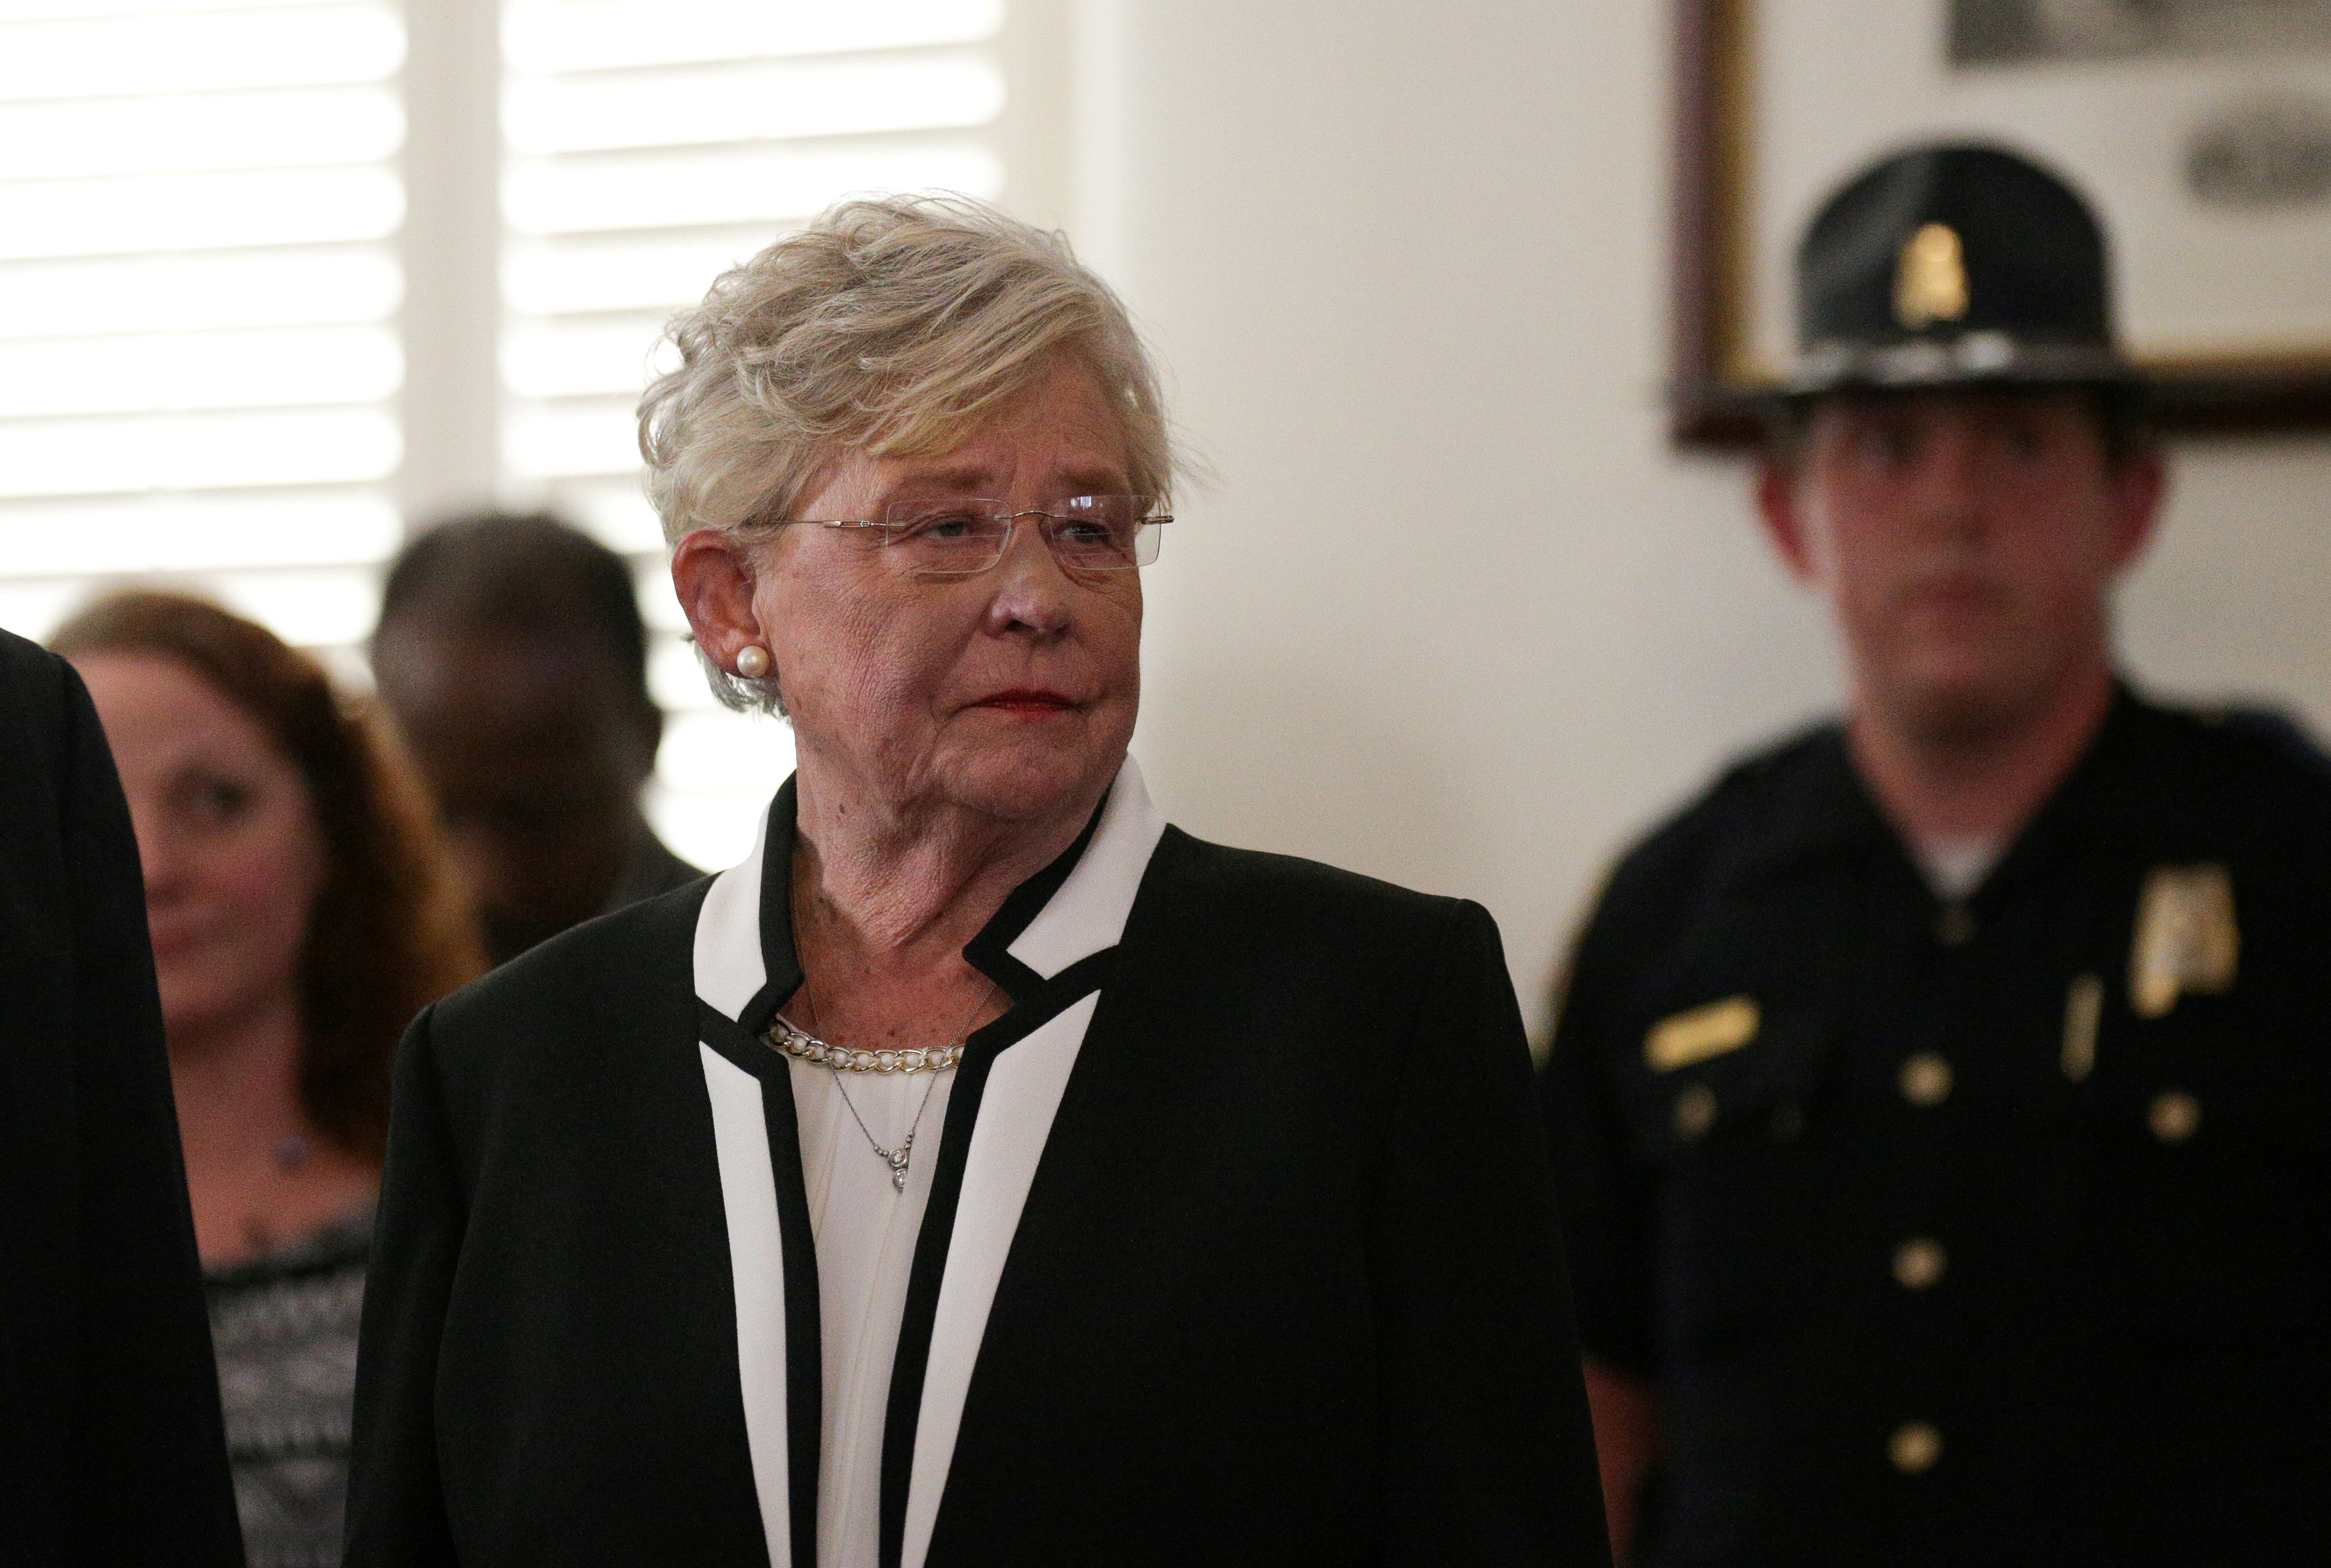 Lt Governor Kay Ivey waits to be sworn in shortly after Alabama Governor Robert Bentley announced his resignation amid impeachment proceedings on accusations stemming from his relationship with a former aide in Montgomery